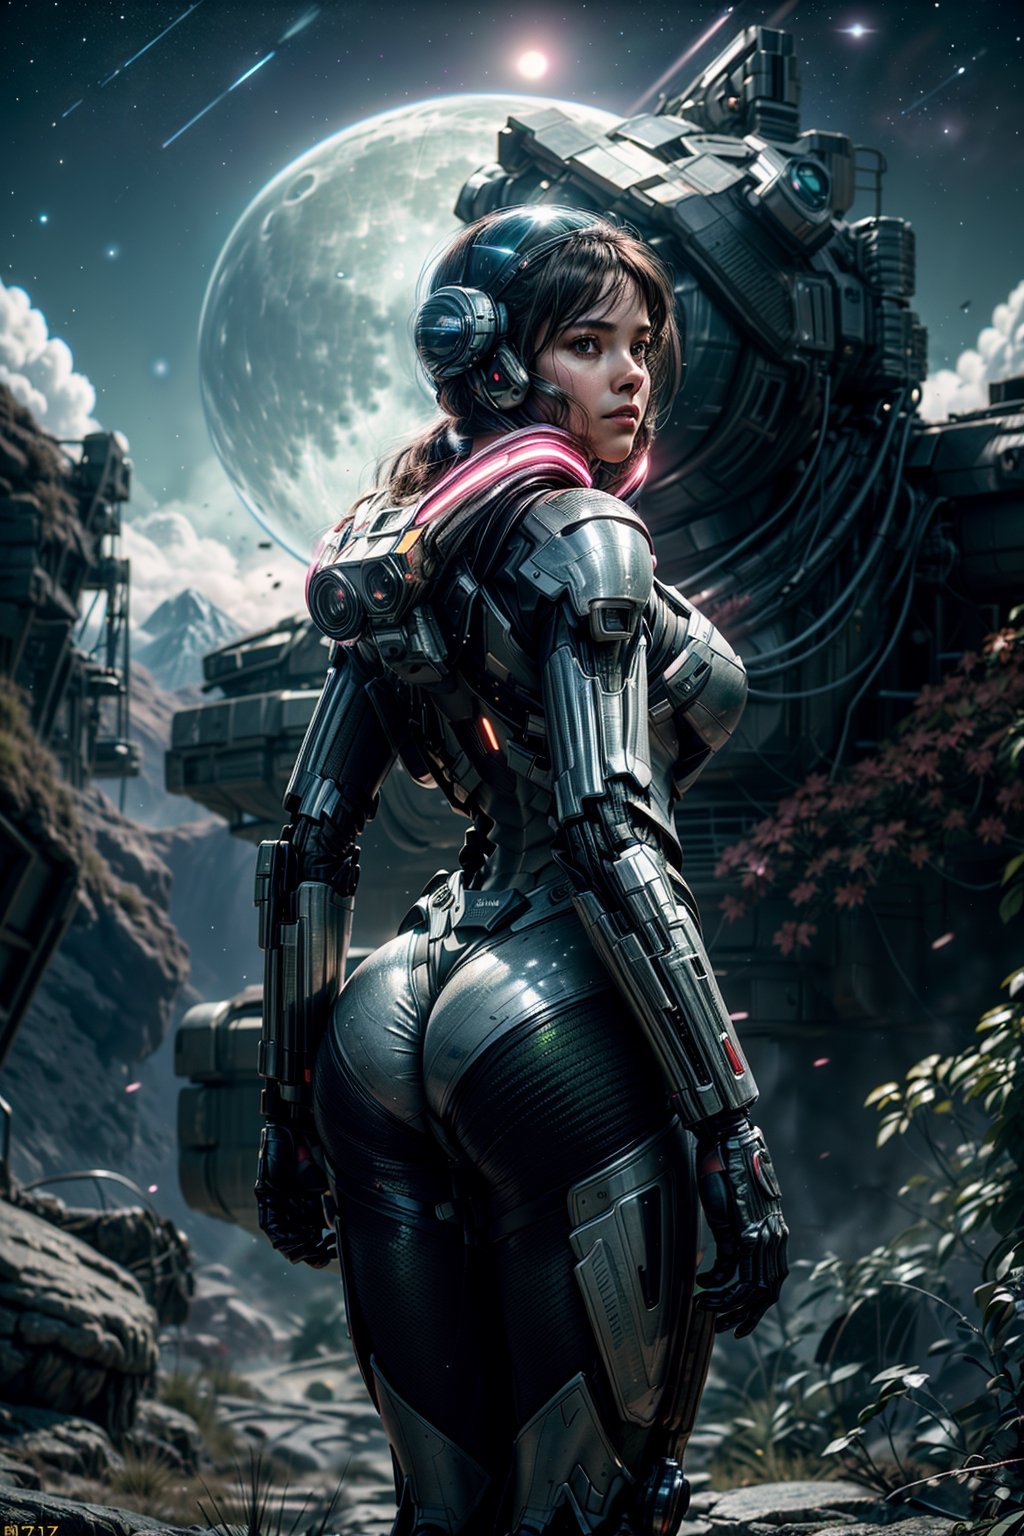 Highly detailed RAW color Photo, Rear Angle, Full Body, of (female space soldier, wearing vivid bright pink and black space suit, helmet, tined face shield, rebreather), from behind, nice ass, pear shaped ass, outdoors, (looking up at advanced alien structure), (sci-fi), (mountains:1.1), (lush green vegetation), (two moons in sky:1.3), (highly detailed, hyperdetailed, intricate), (lens flare:0.7), (bloom:0.7), particle effects, raytracing, cinematic lighting, shallow depth of field, photographed on a Sony a9 II, 50mm wide angle lens, sharp focus, cinematic film still from Gravity 2013.,mecha